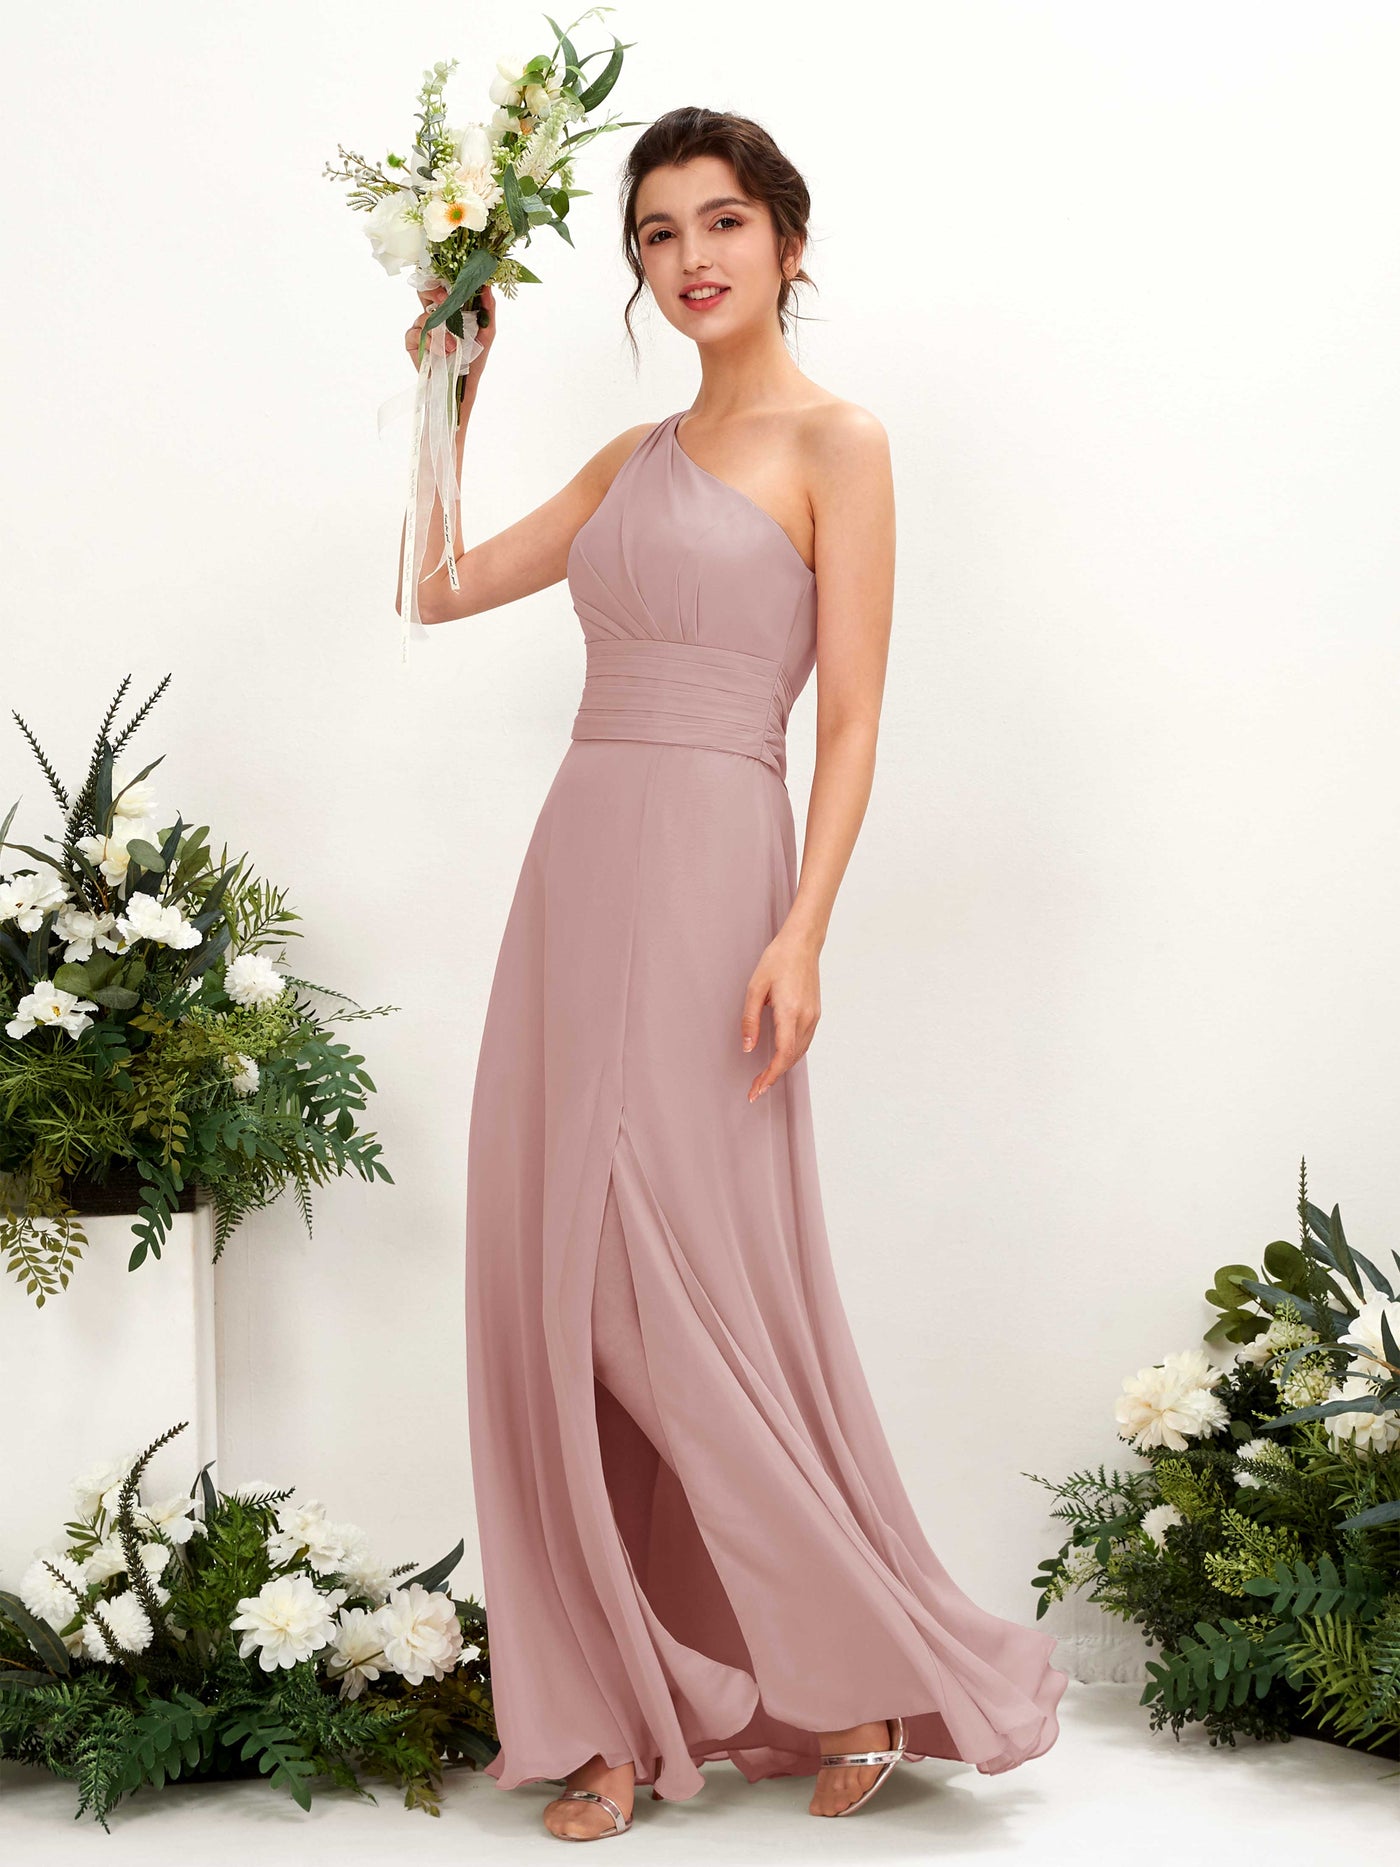 Dusty Rose Bridesmaid Dresses Bridesmaid Dress A-line Chiffon One Shoulder Full Length Sleeveless Wedding Party Dress (81224709)#color_dusty-rose